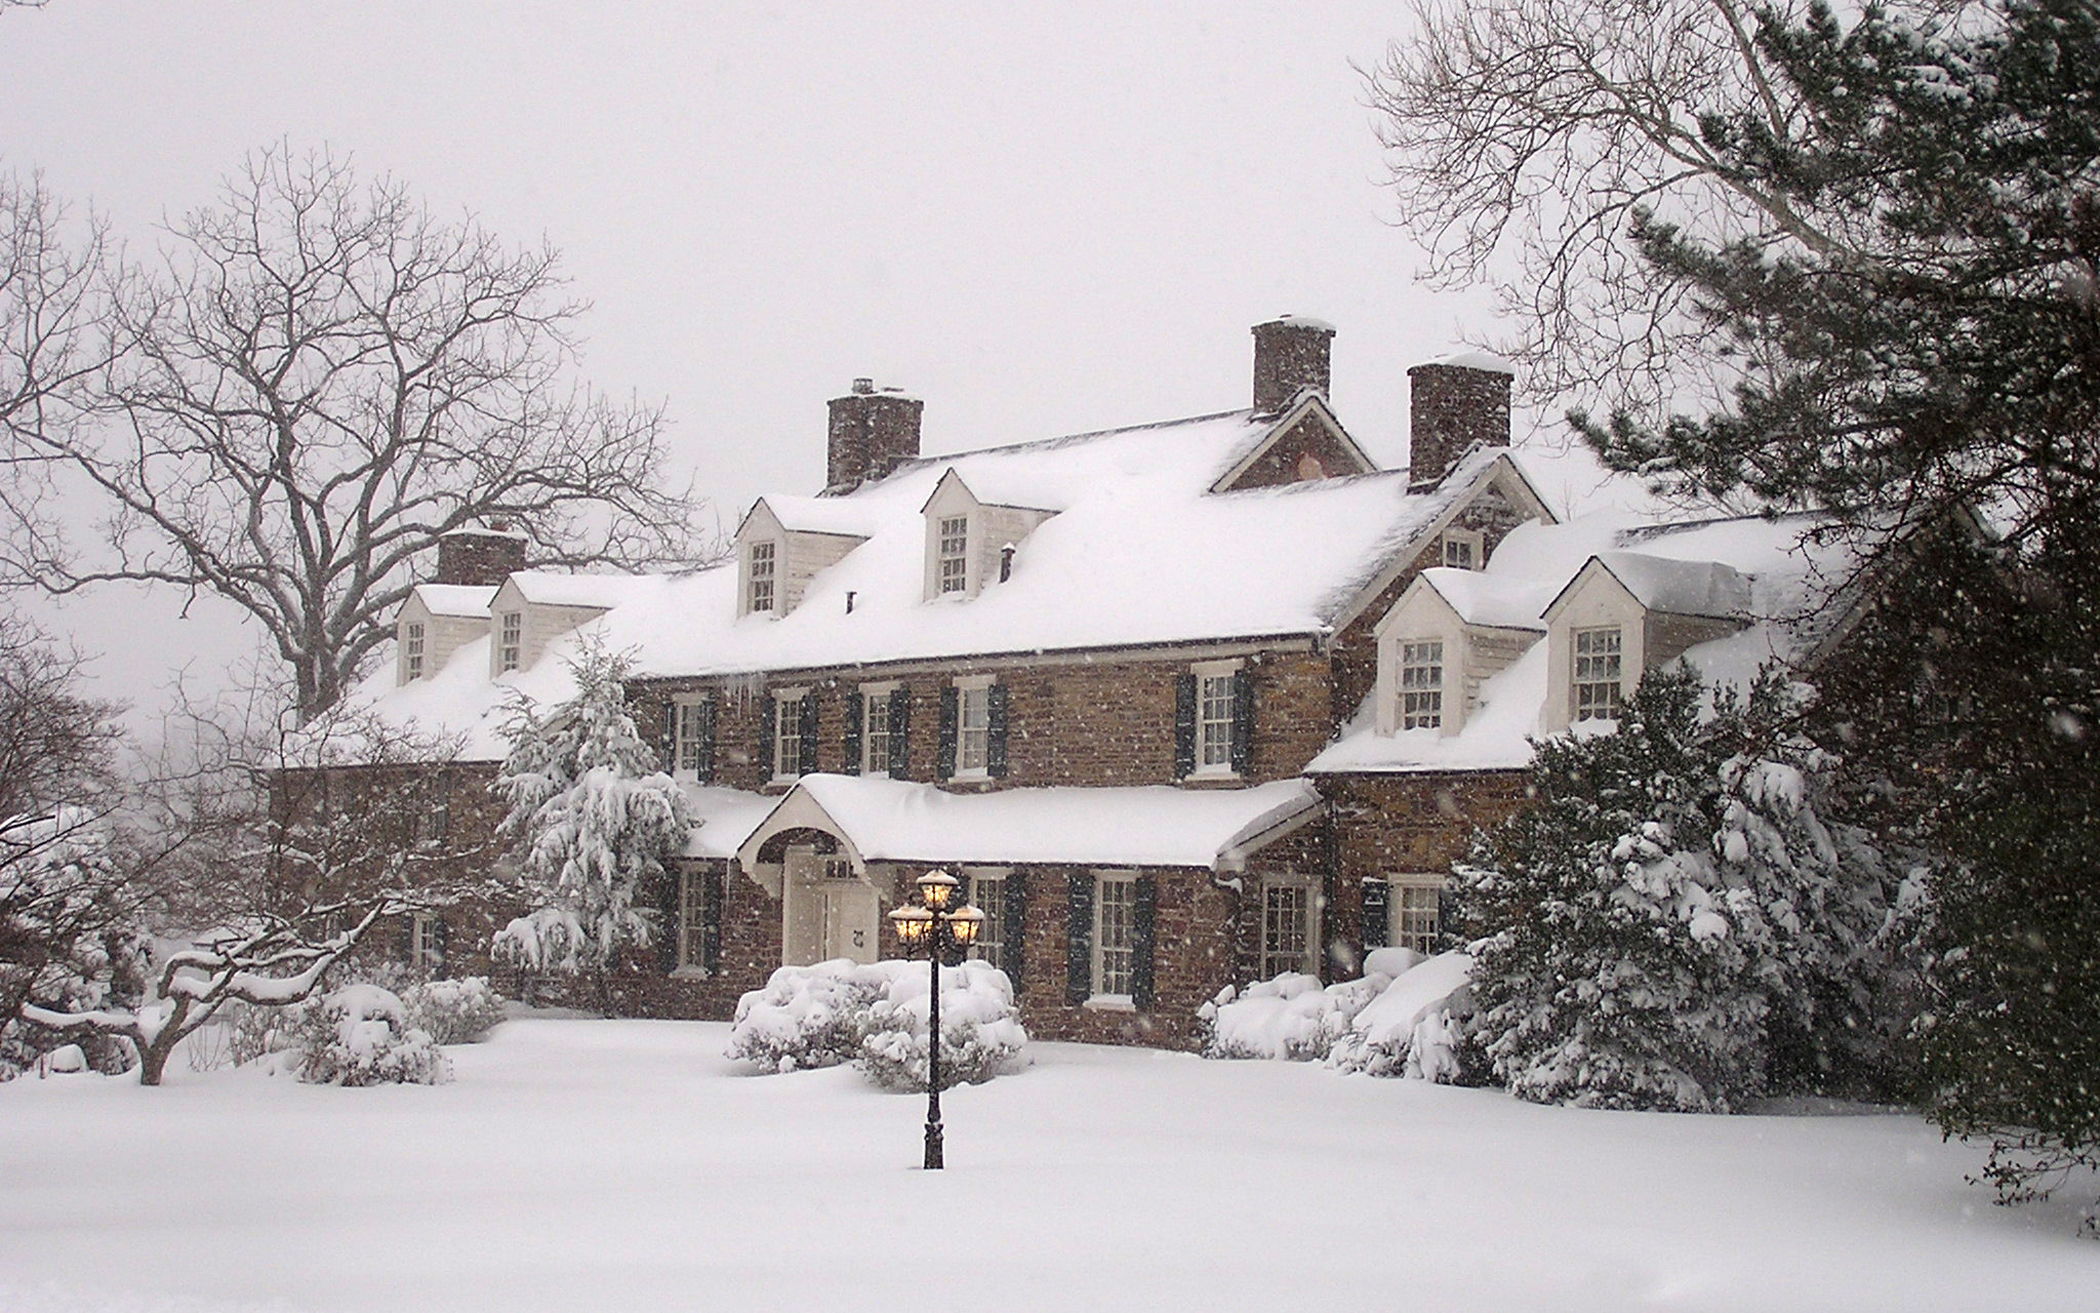 A breathtaking snow-covered Pearl S. Buck House in winter stands as a memorial to Pearl S. Buck, the author of The Good Earth who dedicated her life to helping underpriviledged children.